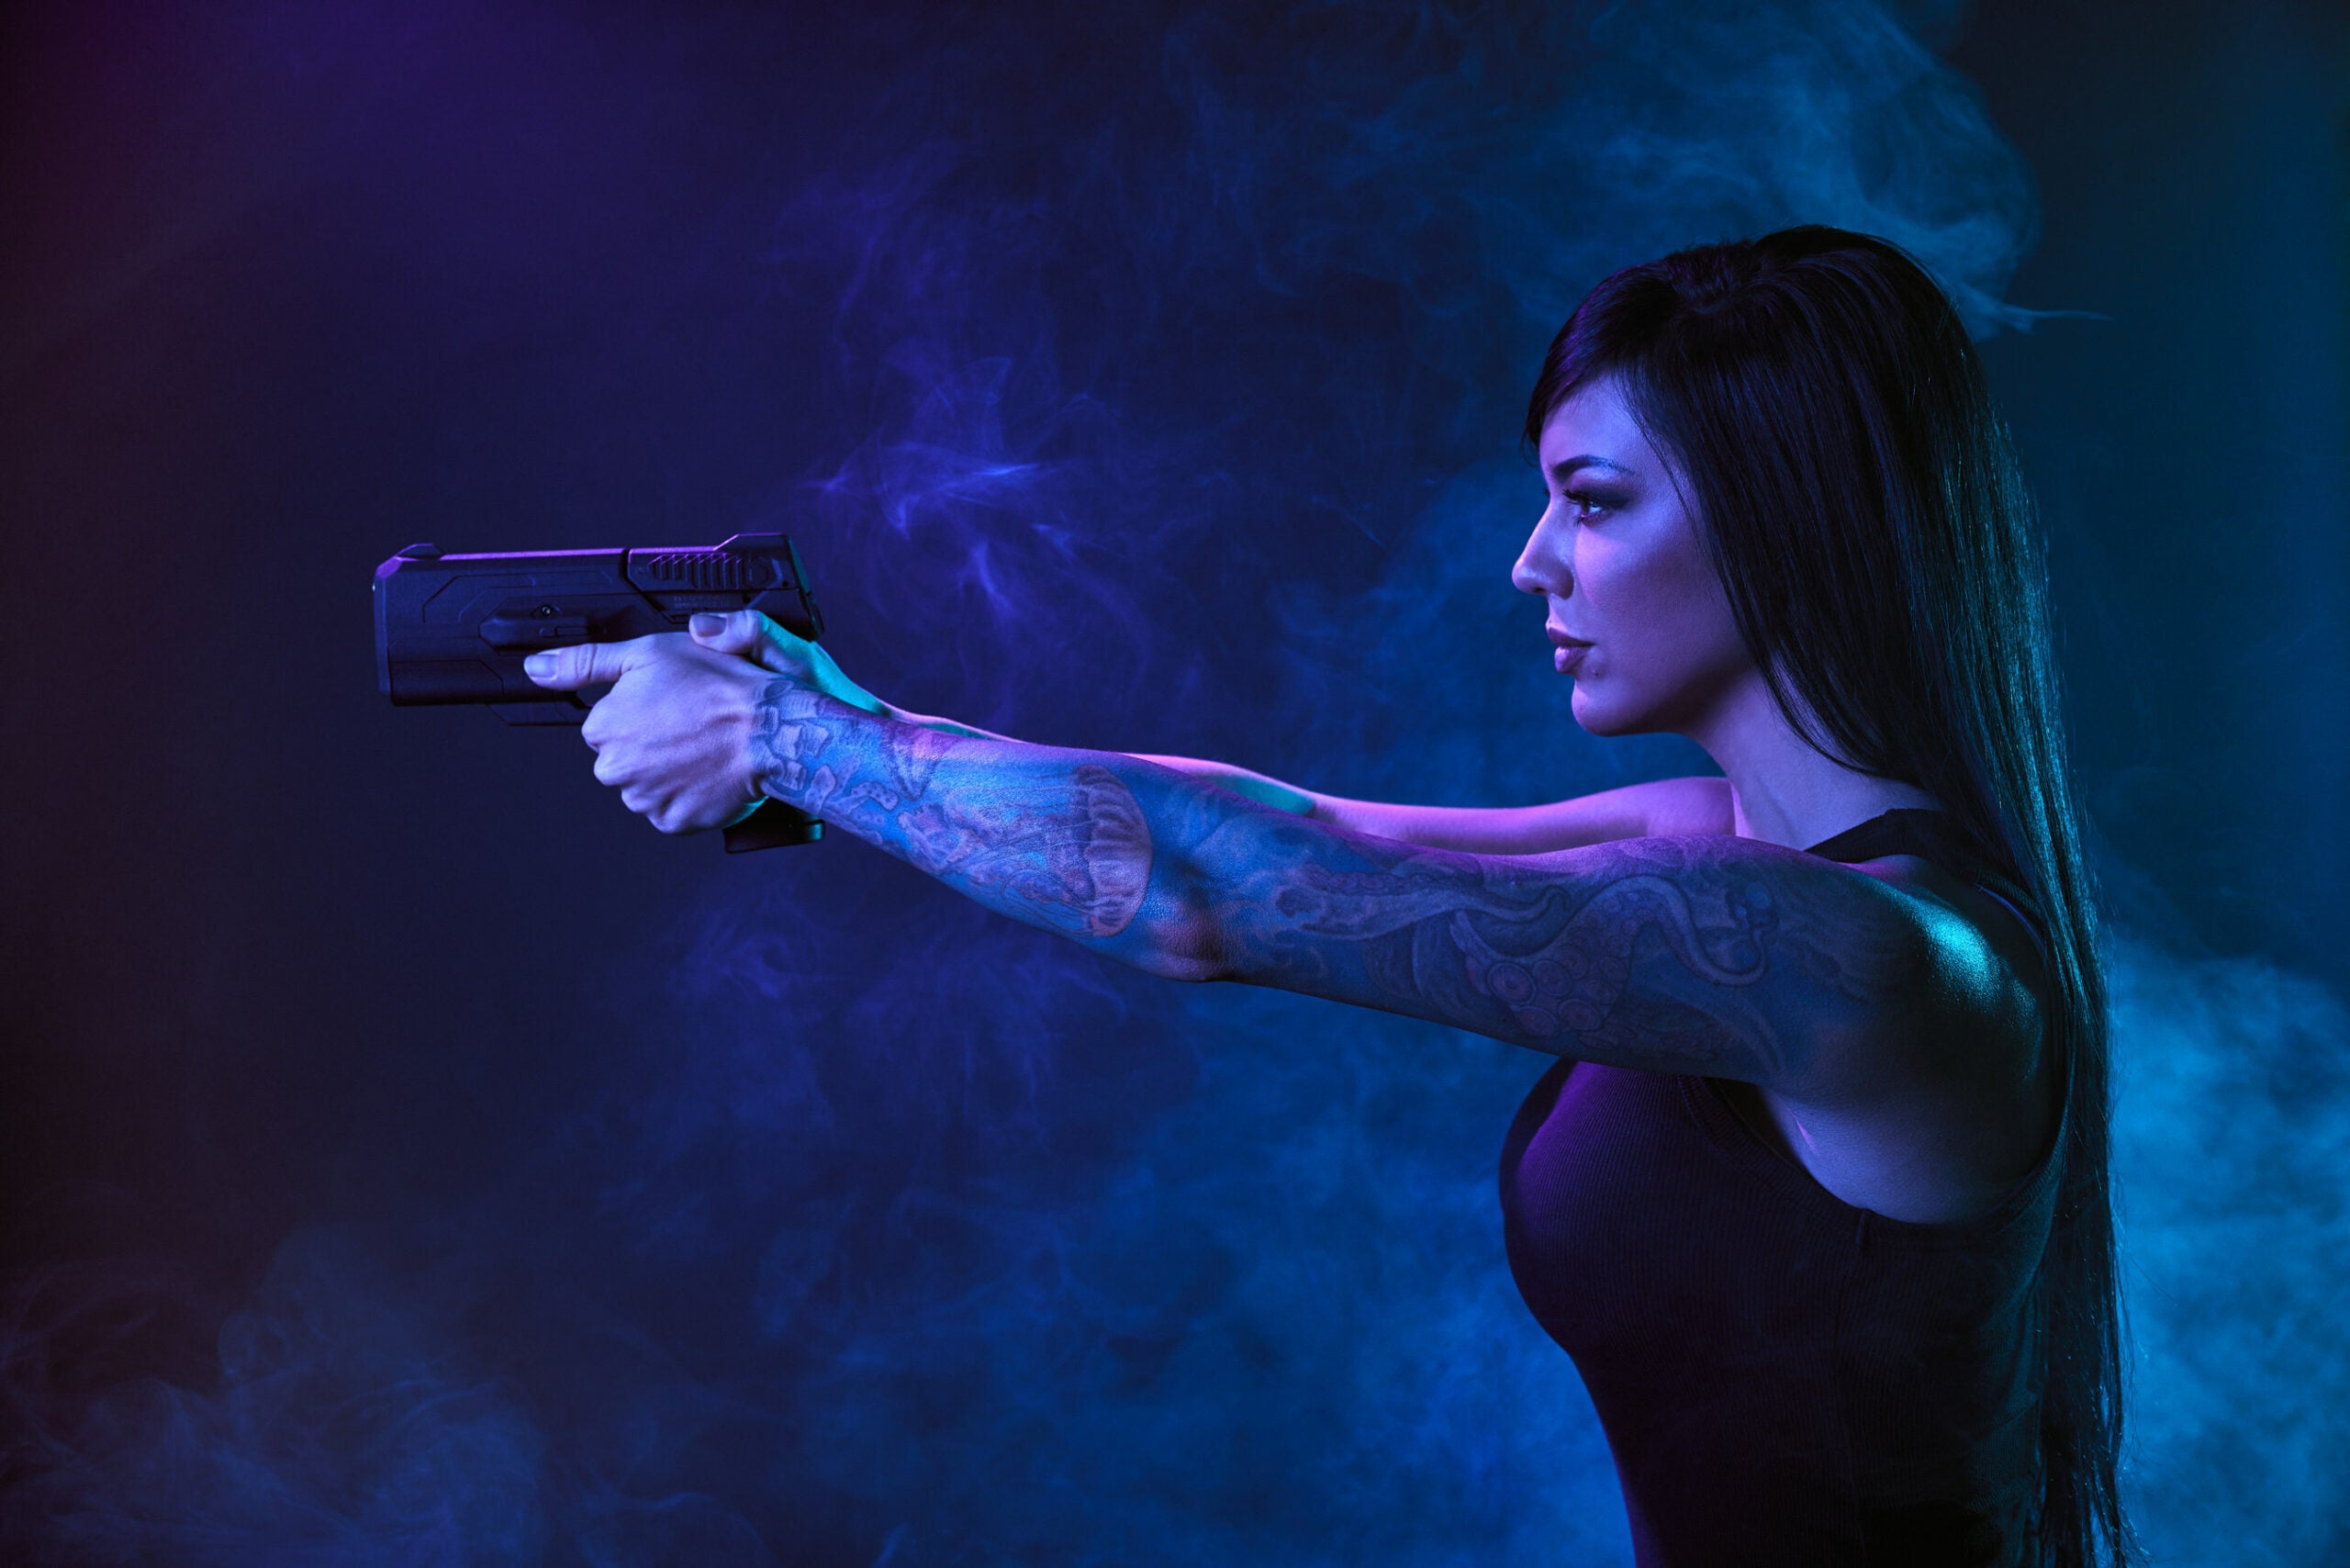 The shooting experience is seamless—authorized users can simply pick the gun up and fire it.